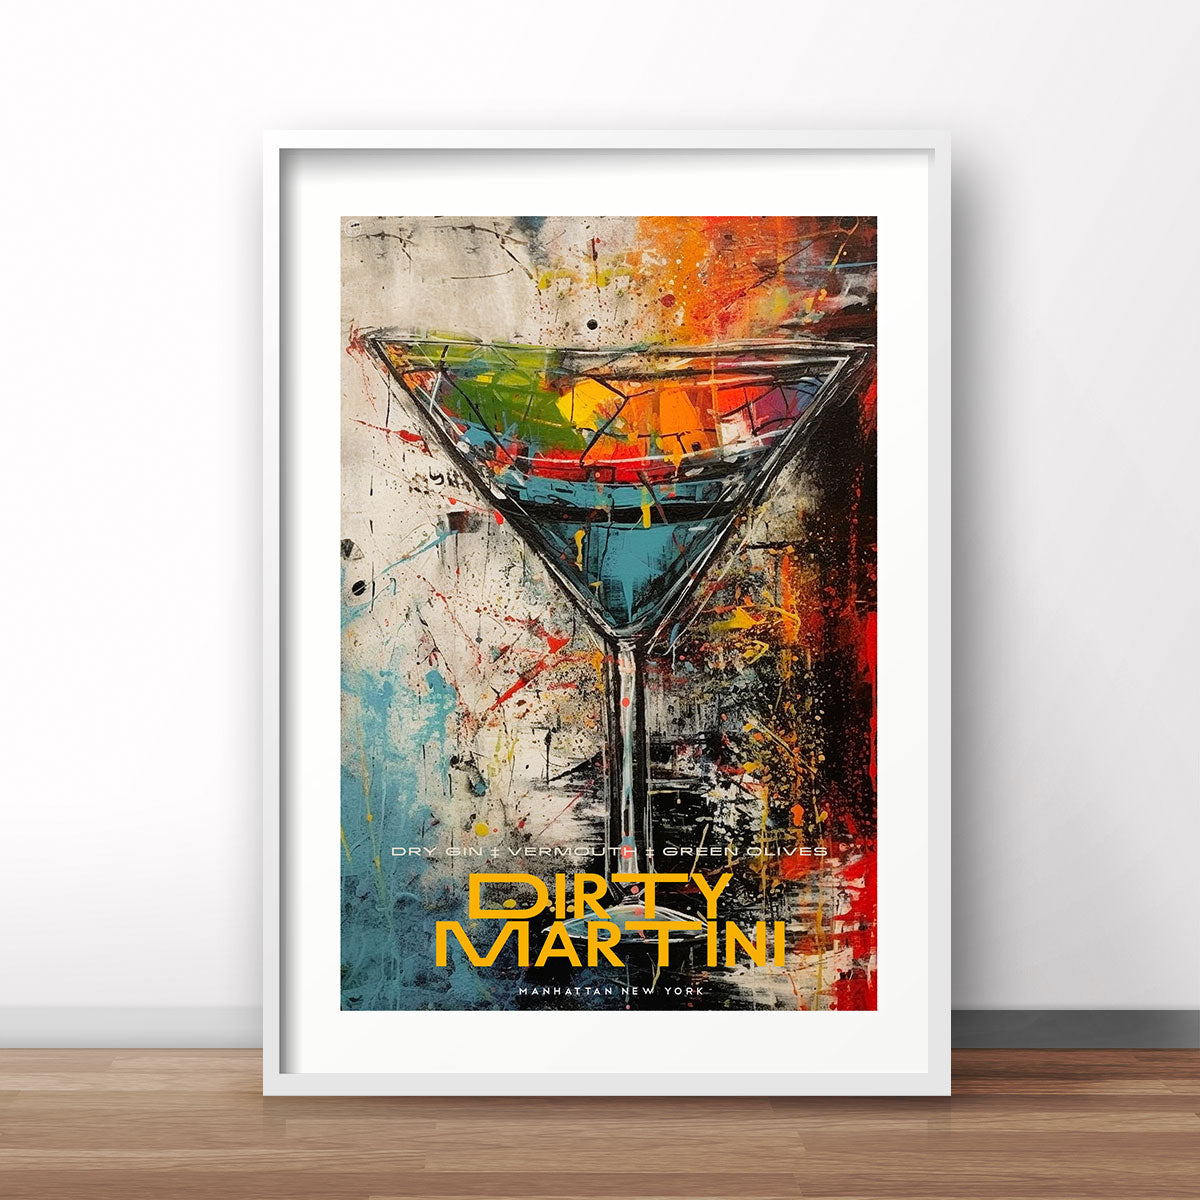 New Yorks Dirty Martini cocktail retro vintage poster print from Places We Luv